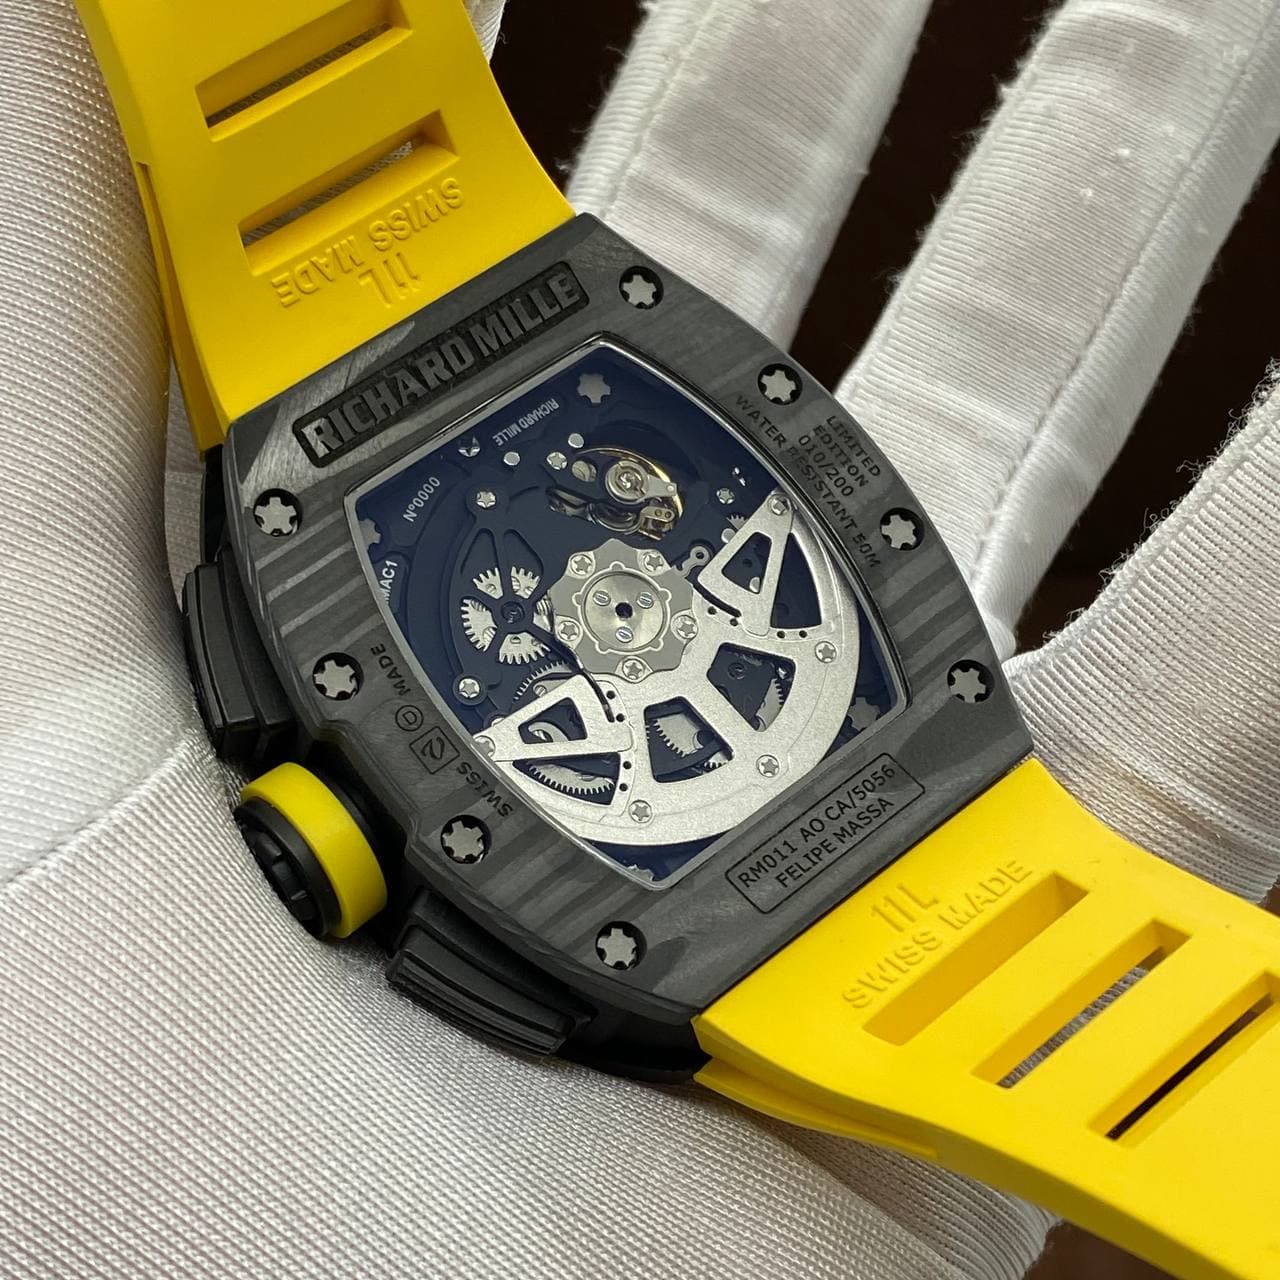 Richard Mille RM 011 Automatic Flyback Chronograph Carbon on Yellow Rubber Strap